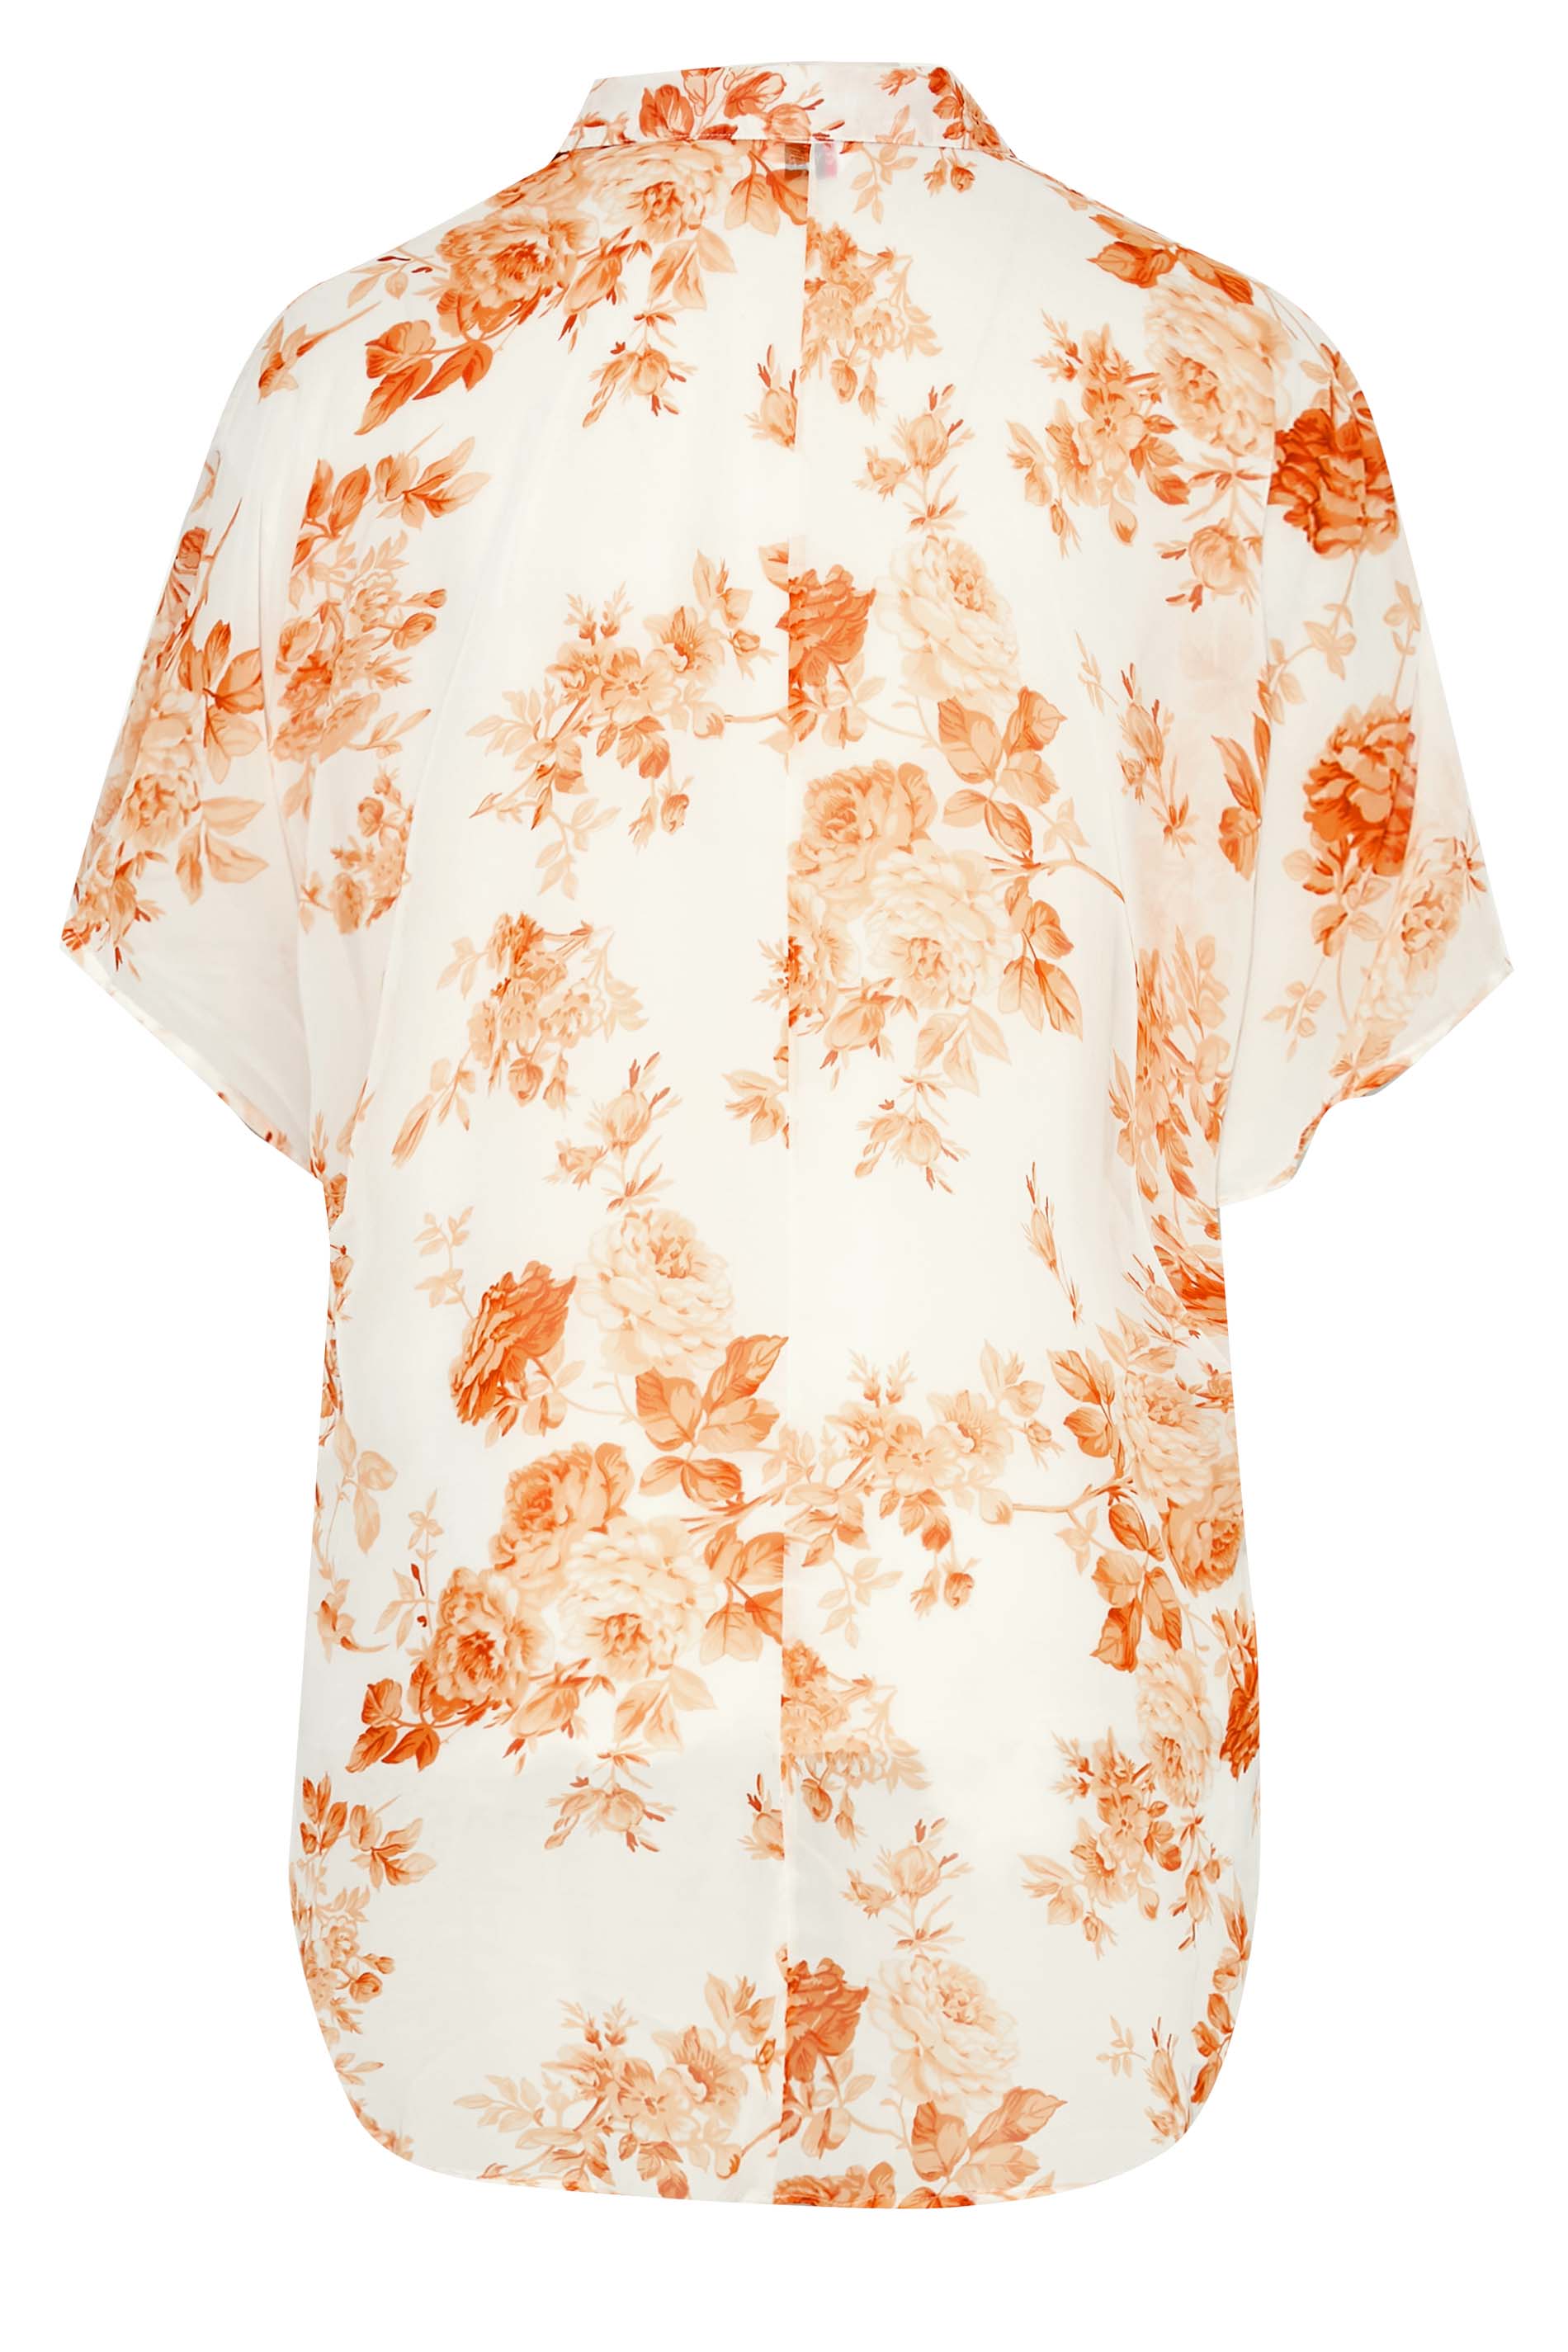 Grande taille  Tops Grande taille  Blouses & Chemisiers | Curve Orange Floral Print Batwing Shirt - SC11947